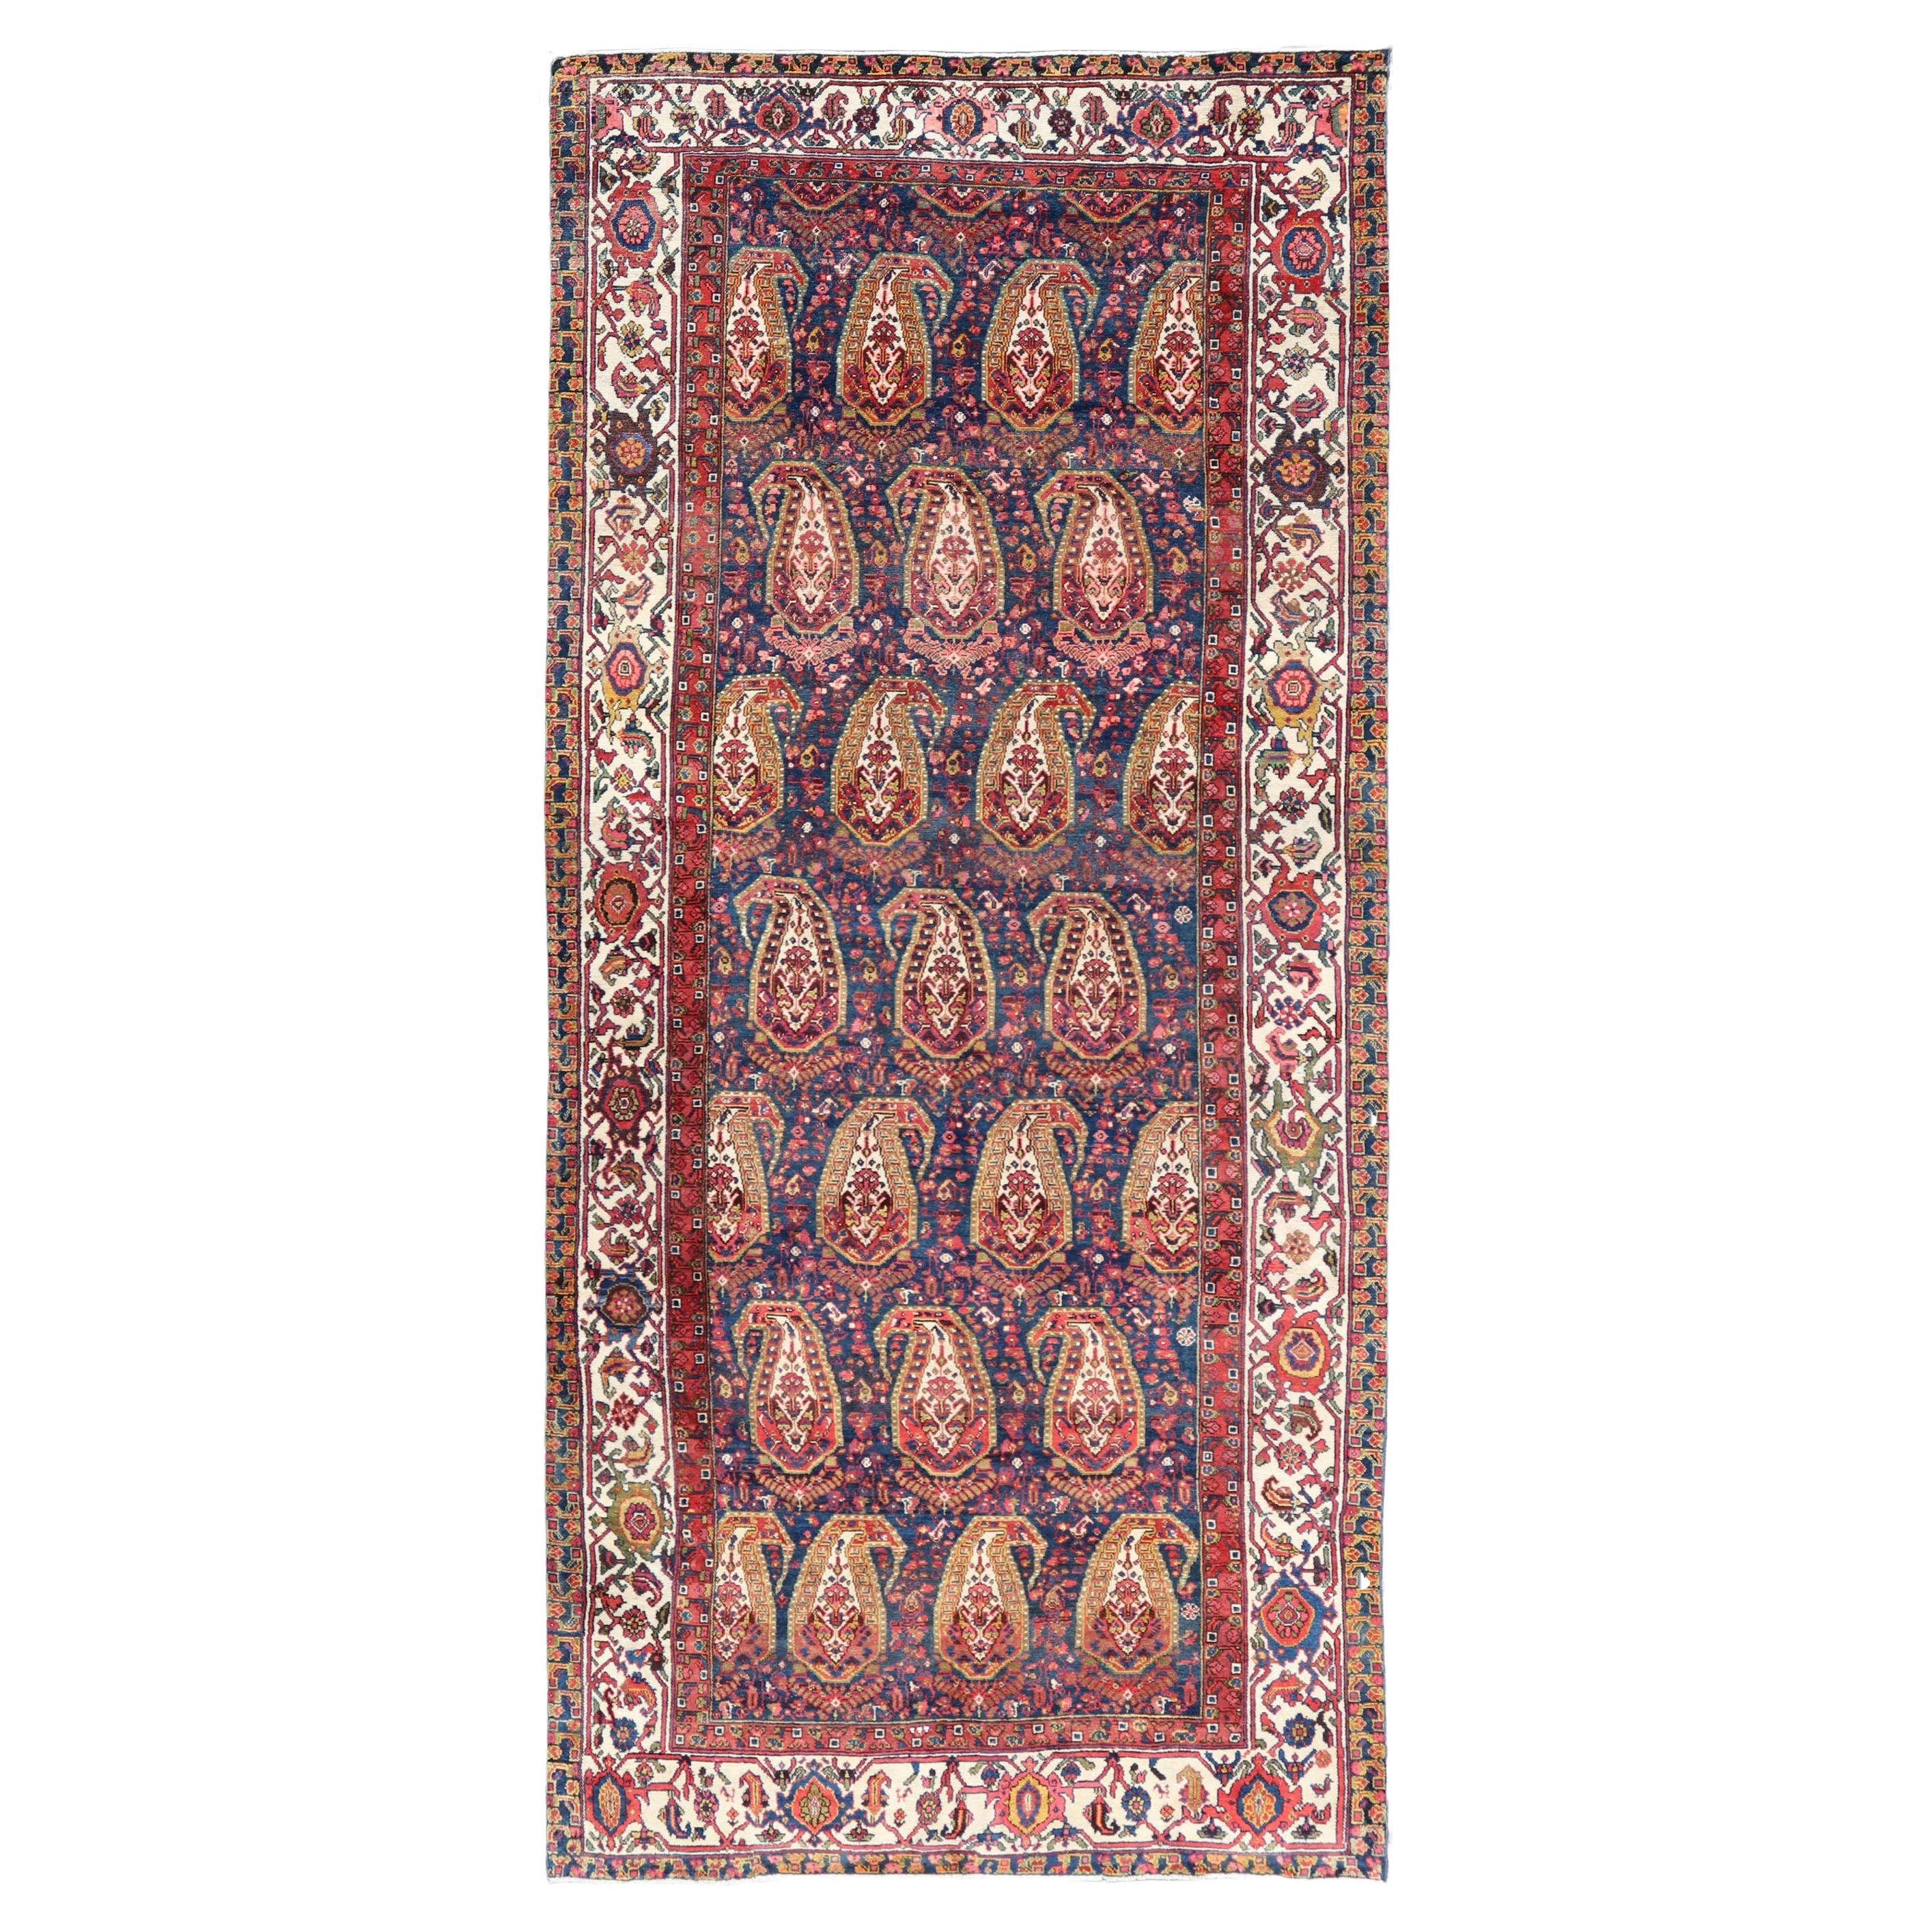 Antique Persian Paisley Field Hamadan in Multi-Tiered Border in Red and Blue For Sale